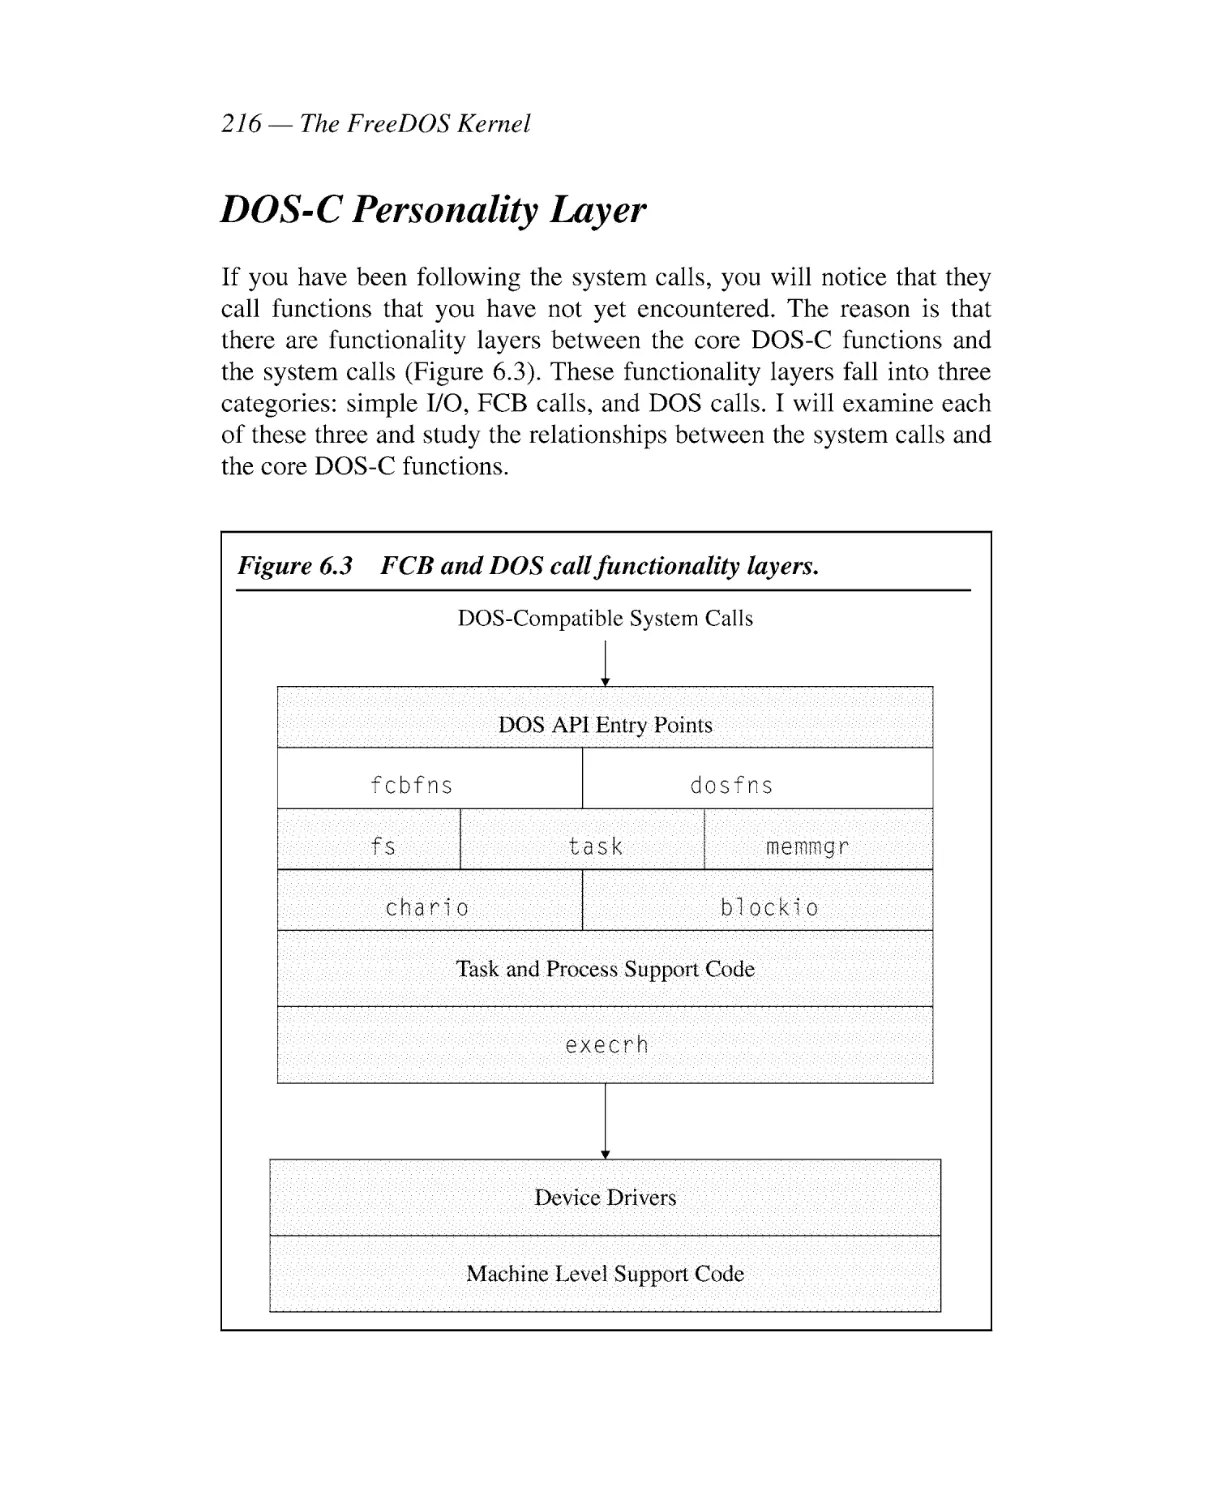 DOS-C Personality Layer